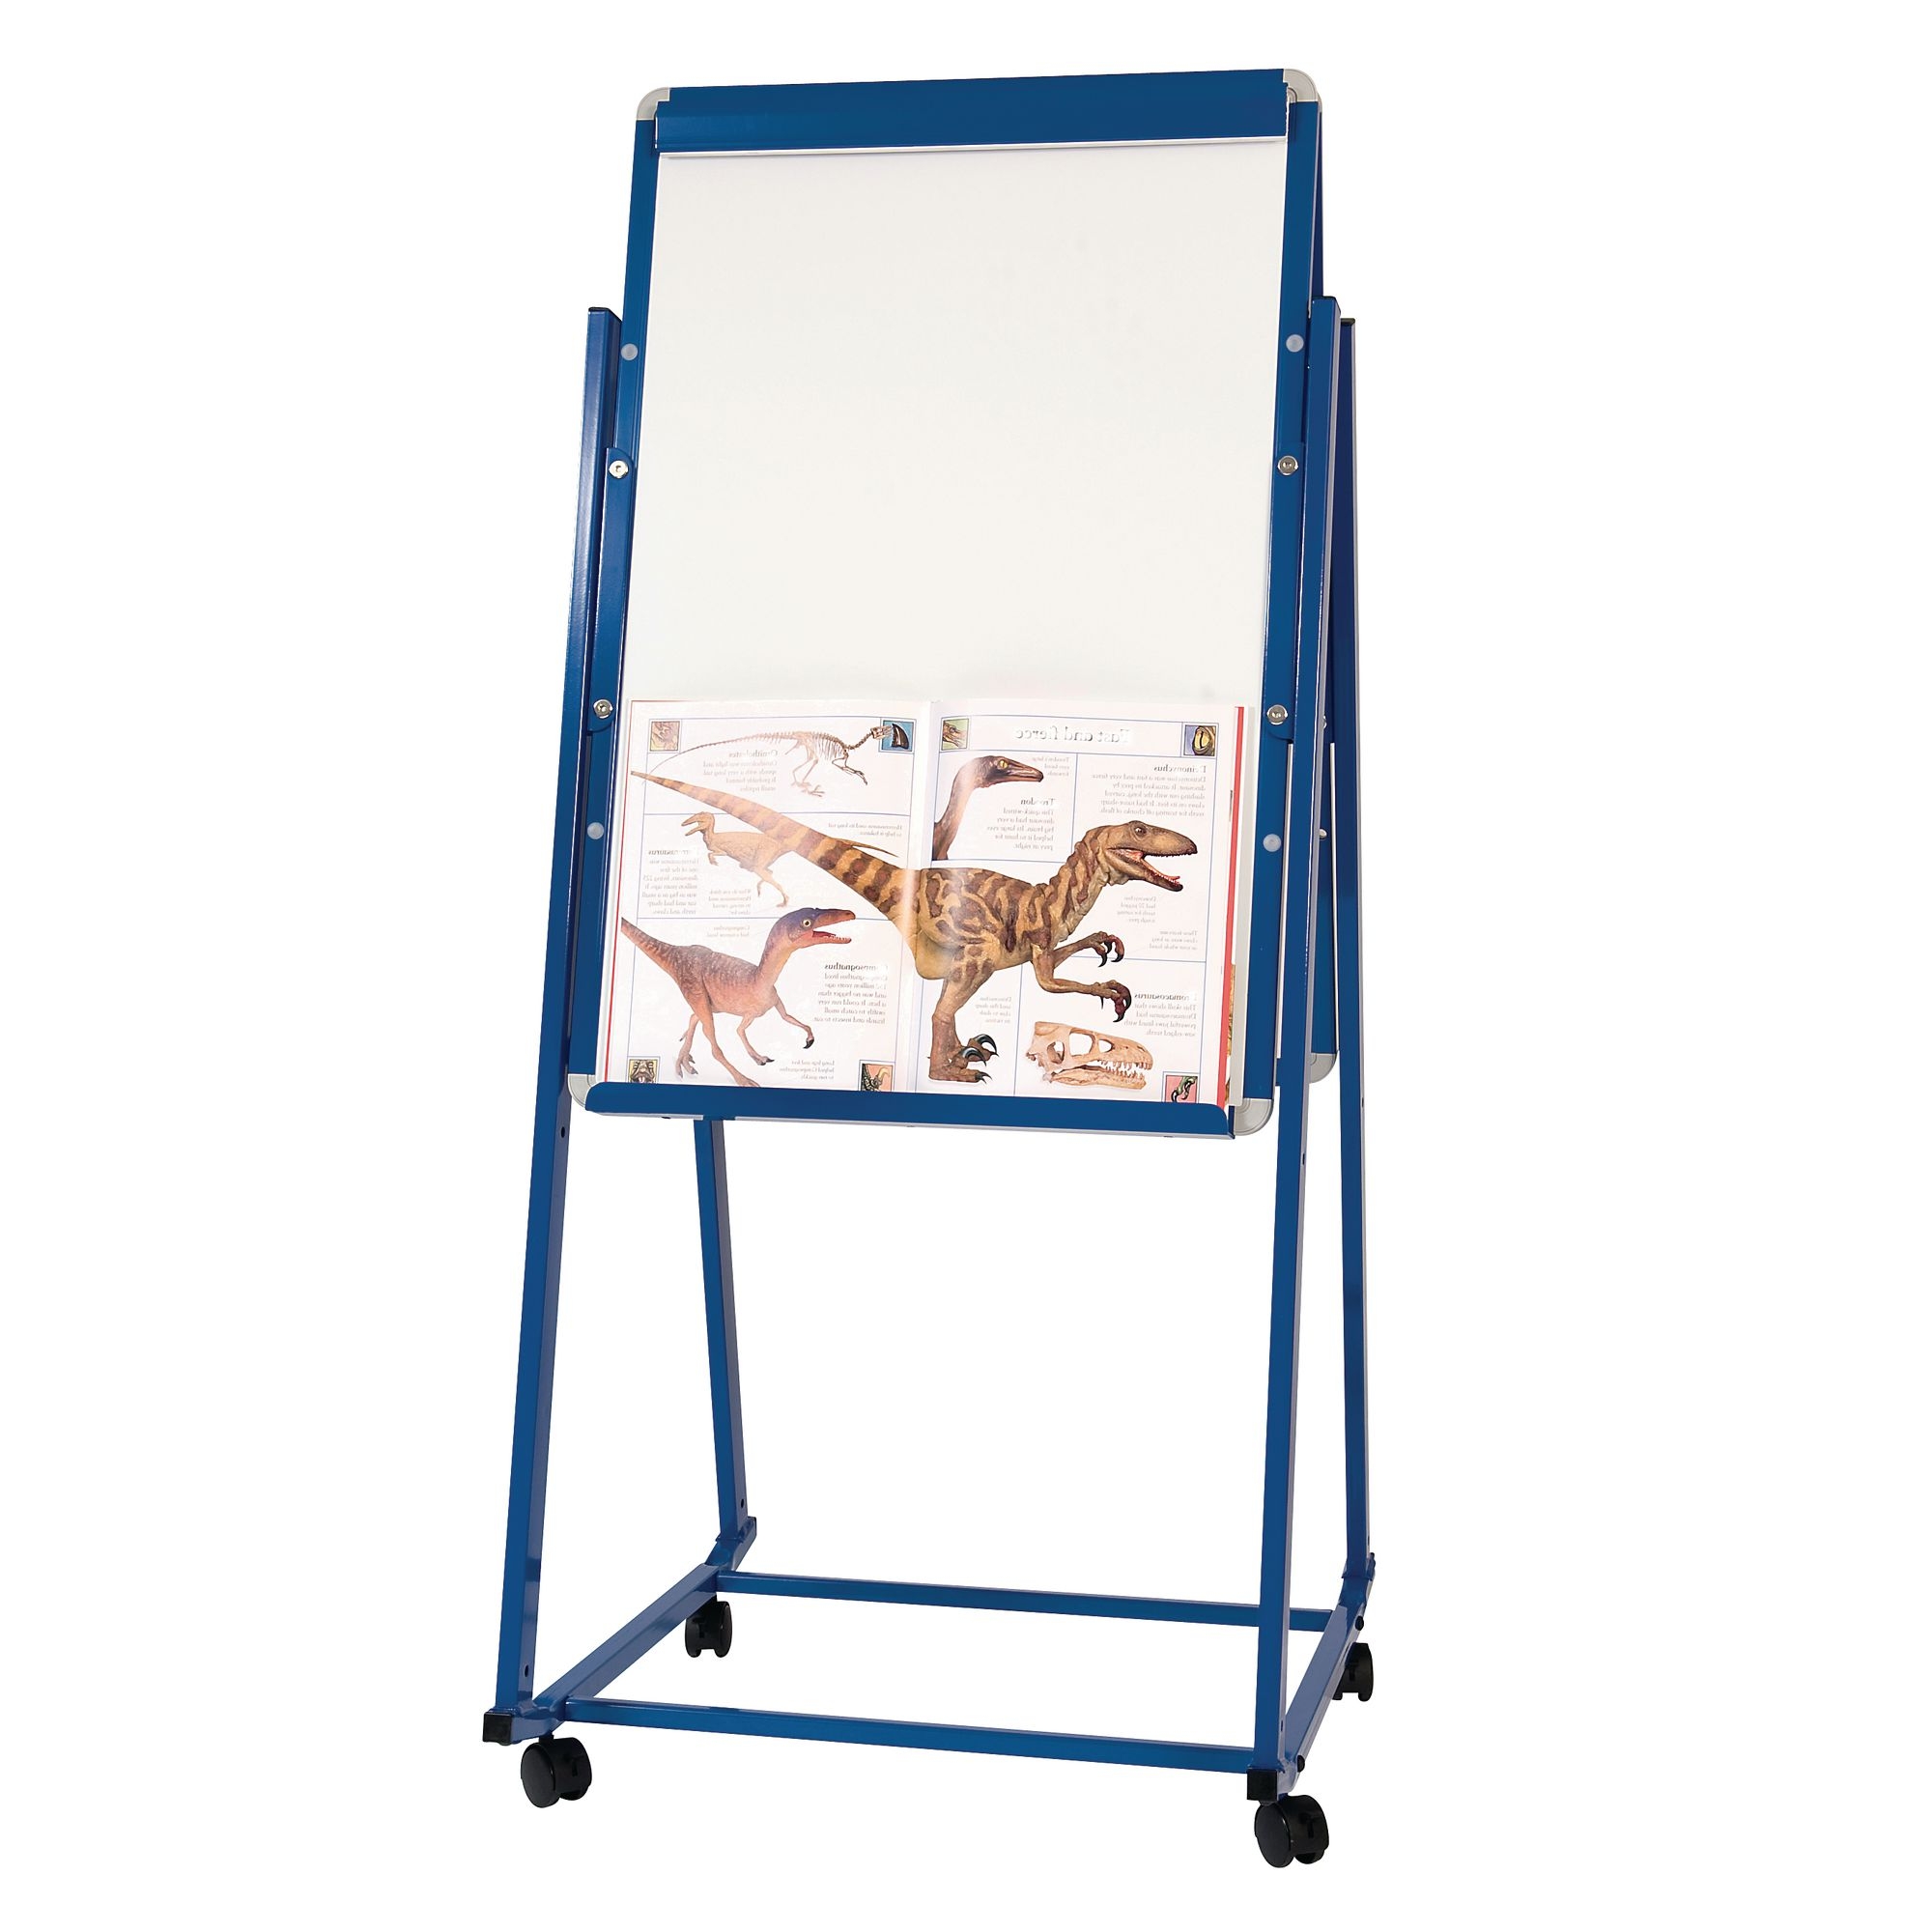 Mobile Magnetic Display Easel Double Sided - Blue